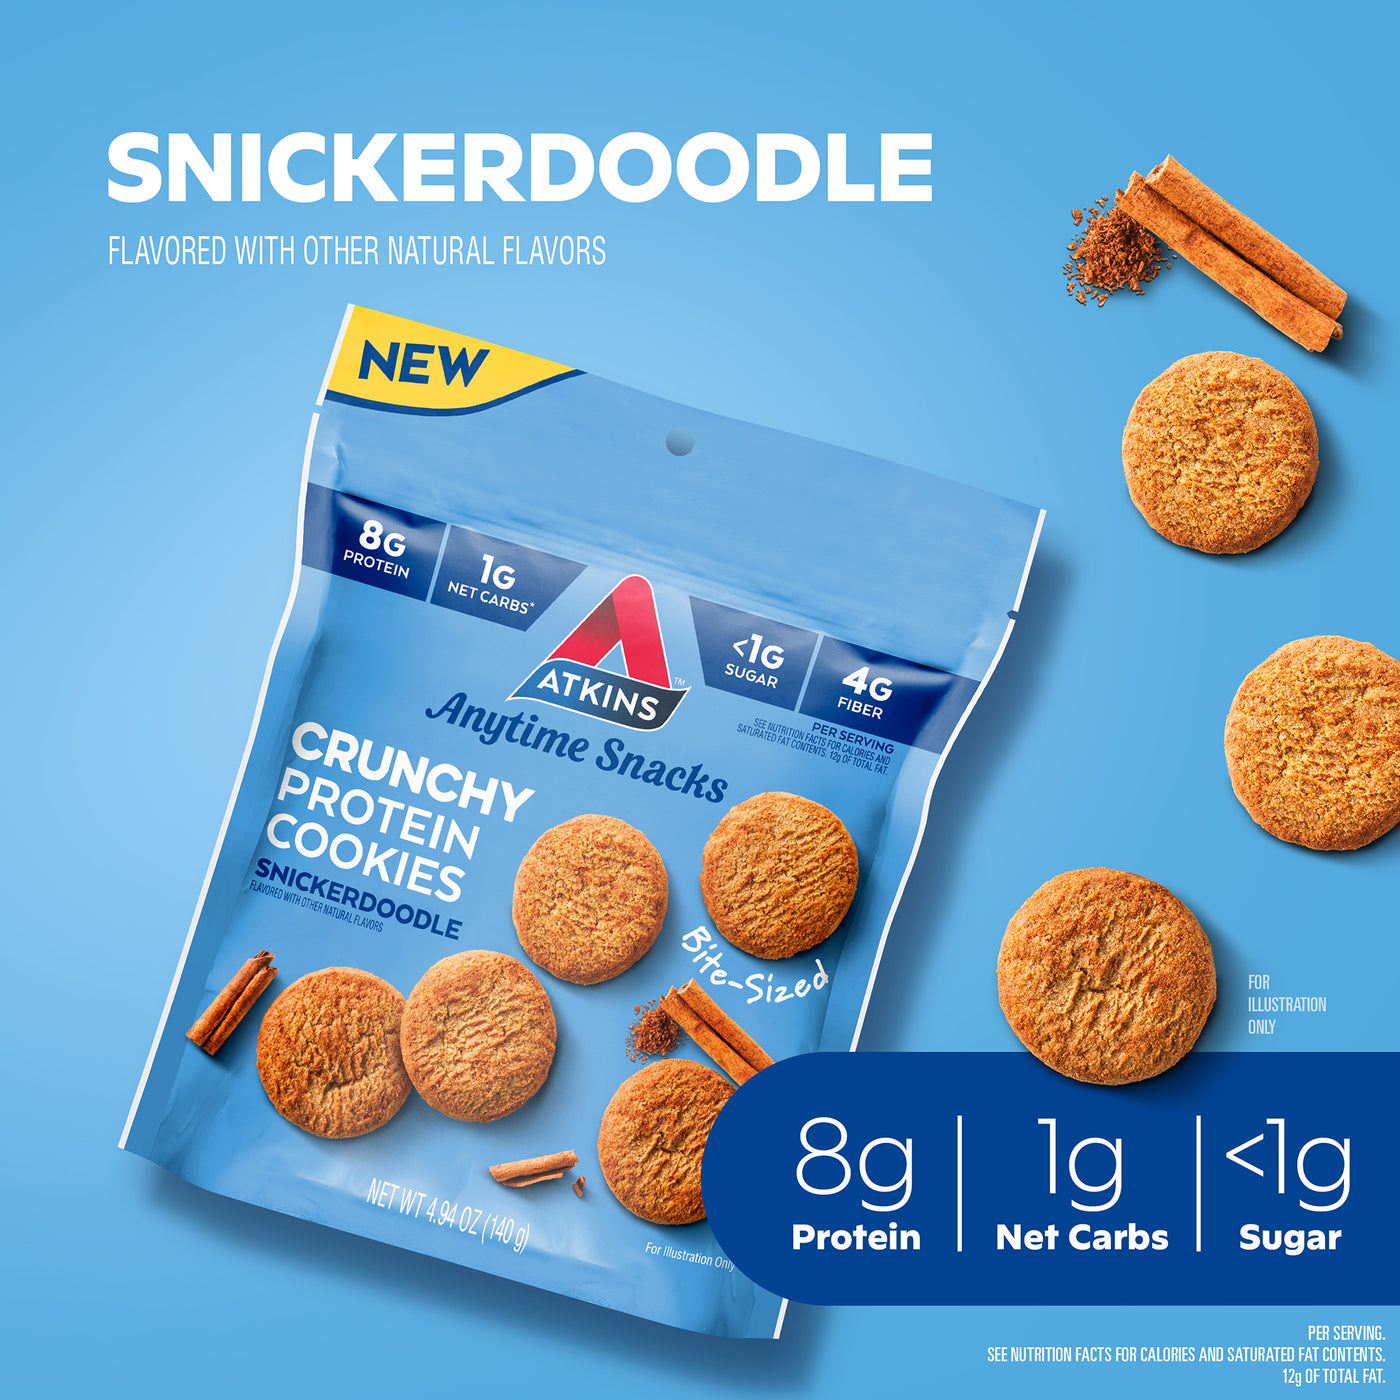 Snickerdoodle Bite-Sized Crunchy Protein Cookies; Naturally flavored with other natural flavors,  8g Protein, 1g Net Carbs, <1g SugarPer Serving. See Nutrition Facts for Calories and Saturated at Contents, 12g of Total Fat. For Illustration Only.